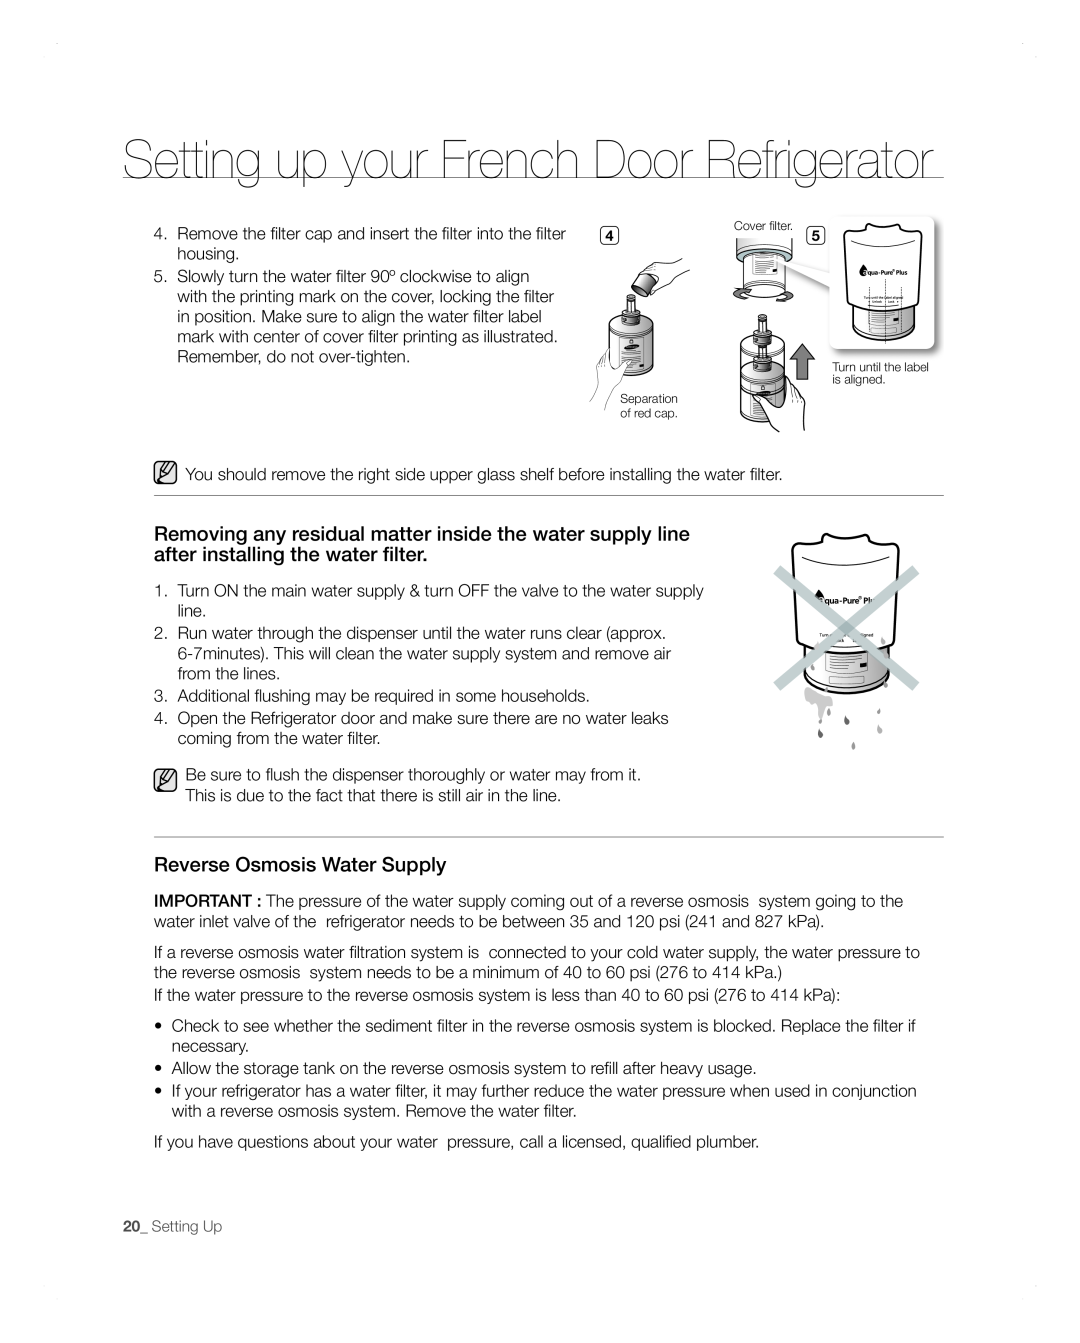 Samsung RFG297AARS user manual Setting up your French Door Refrigerator, Reverse Osmosis Water Supply, housing 